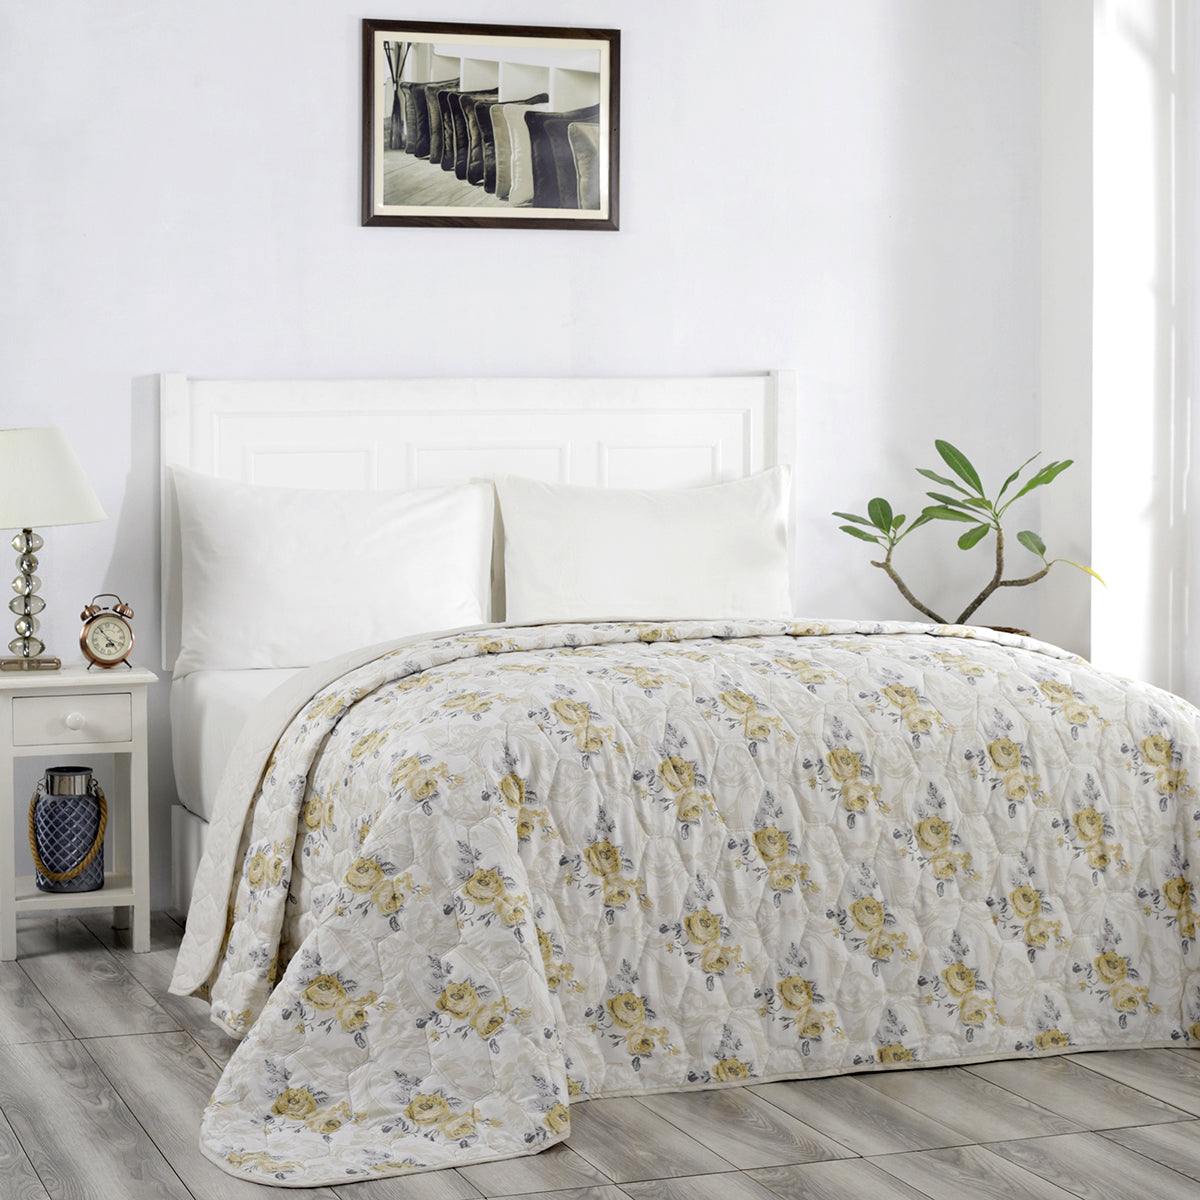 Giardino Giselle Summer AC Quilt/Quilted Bed Cover/Comforter Yellow